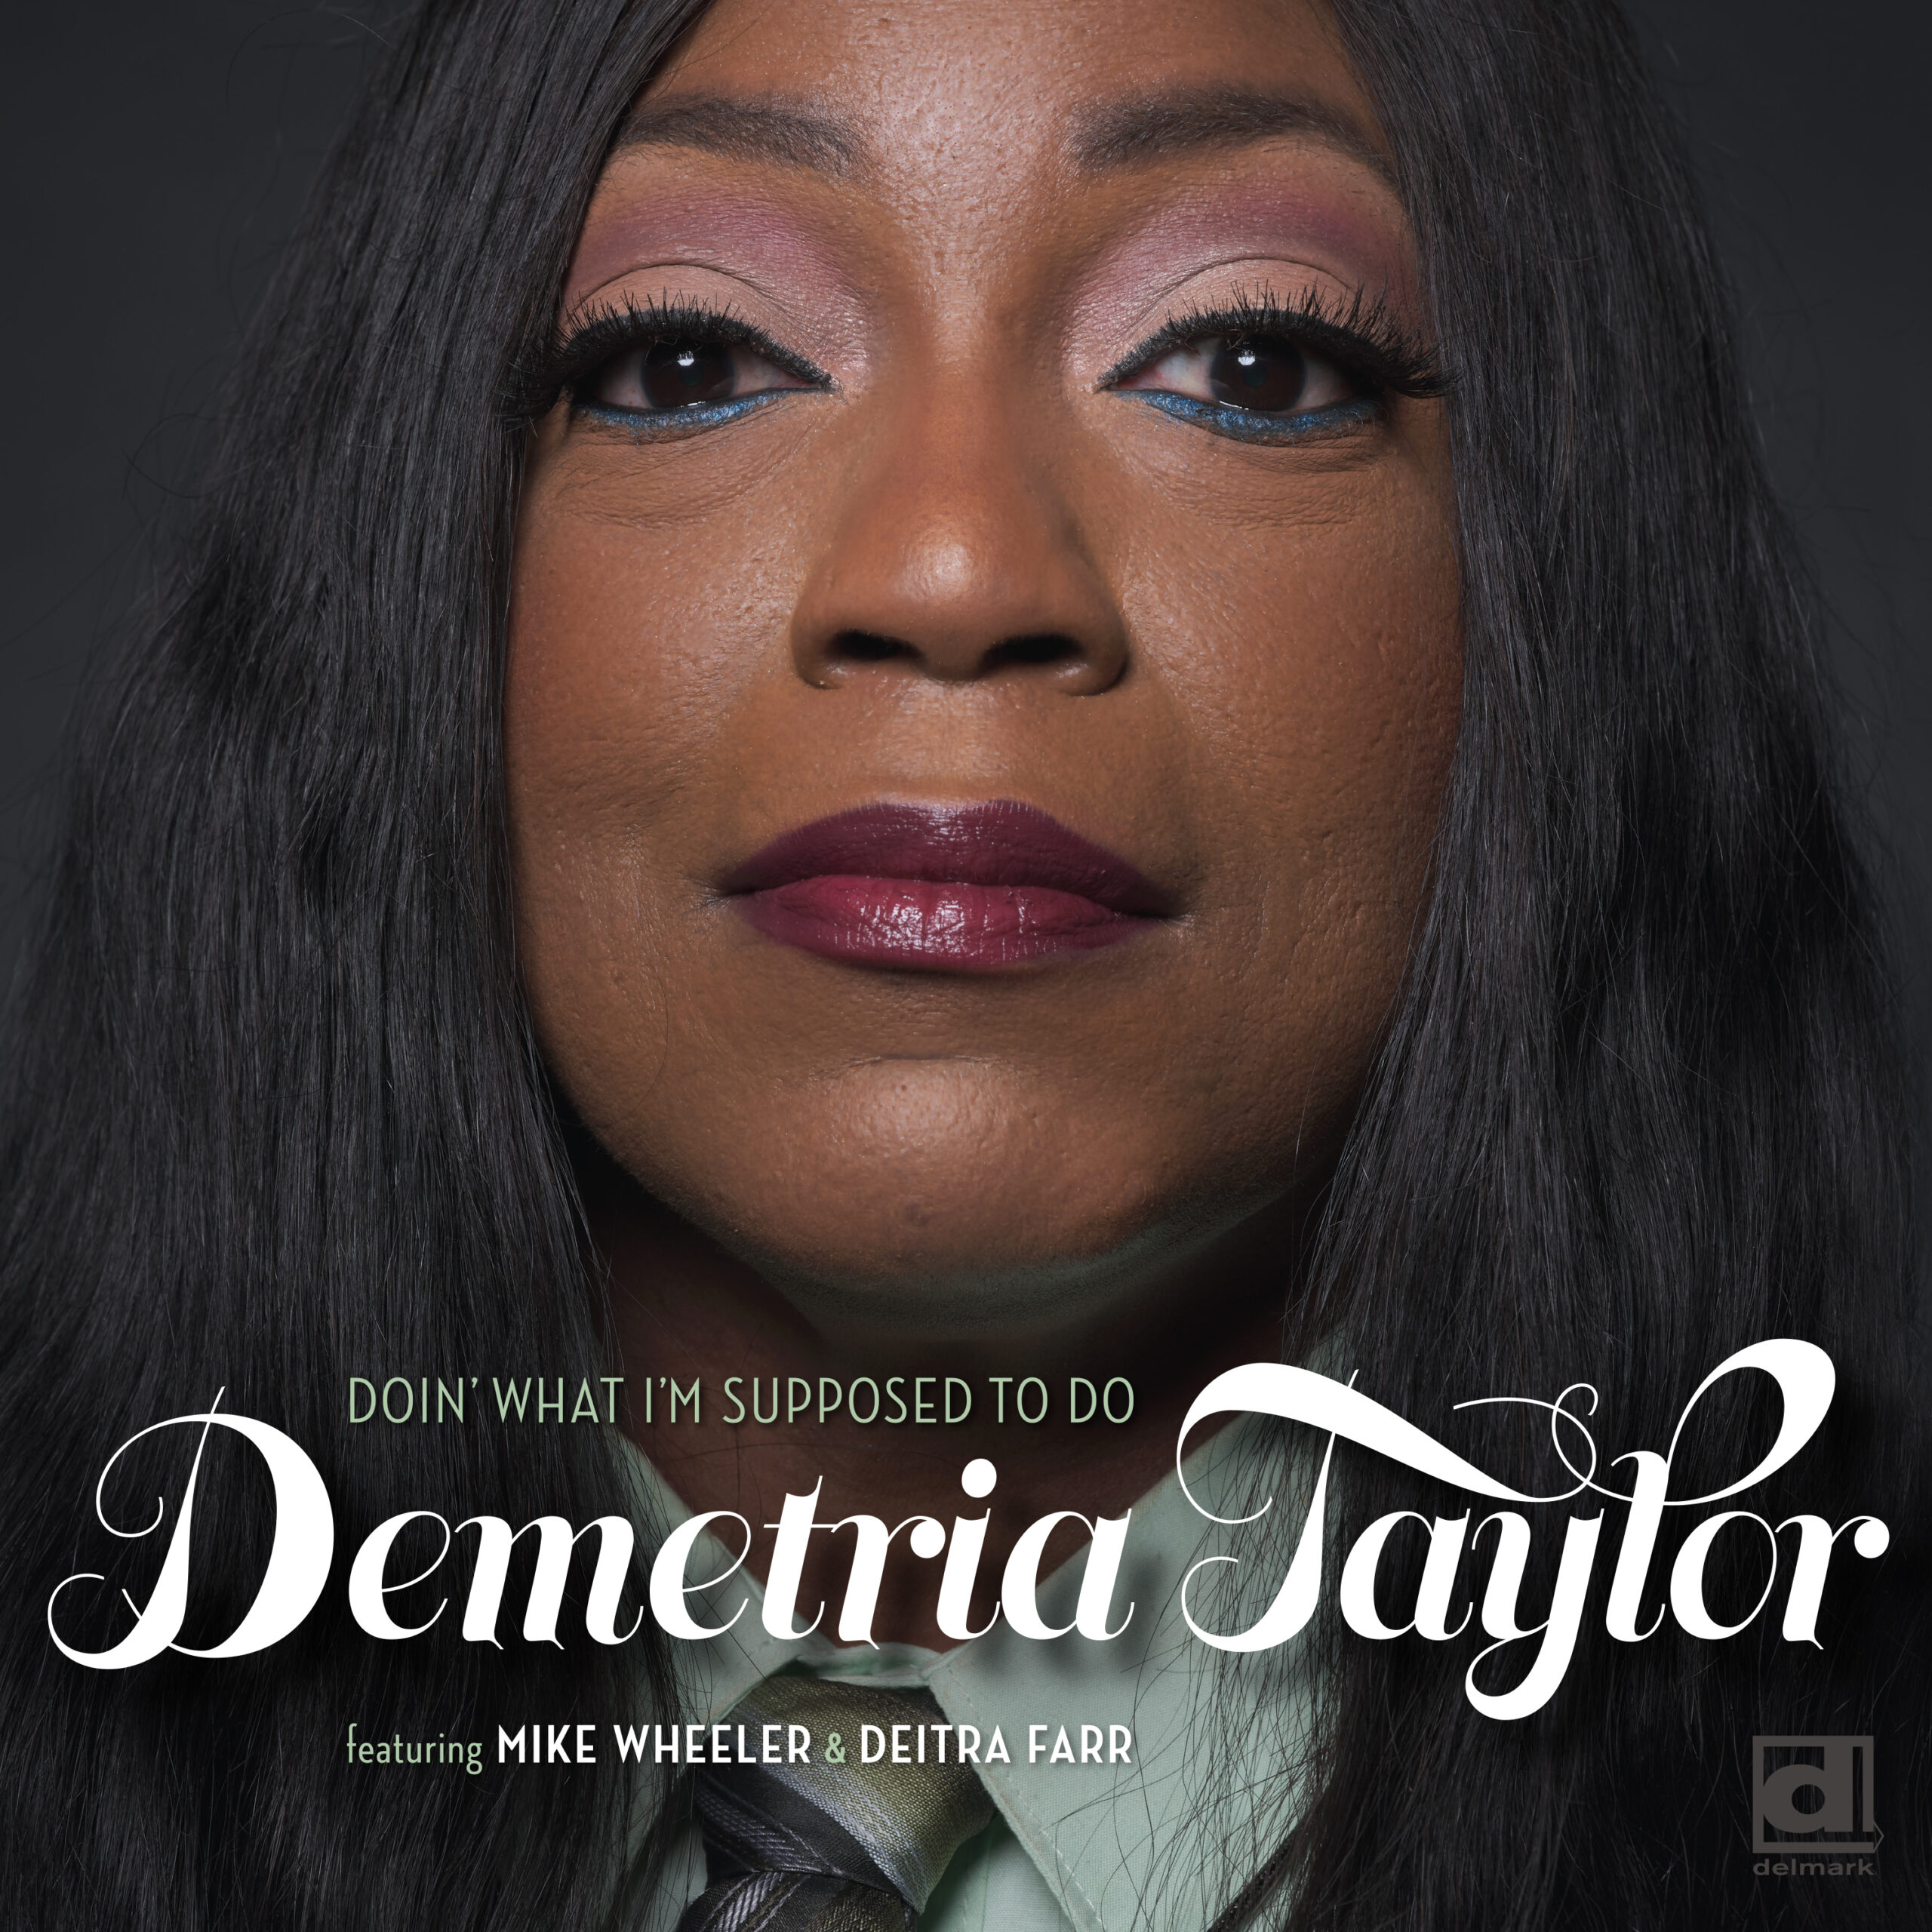 Demetria Taylor - Doin' What I'm Supposed to Do